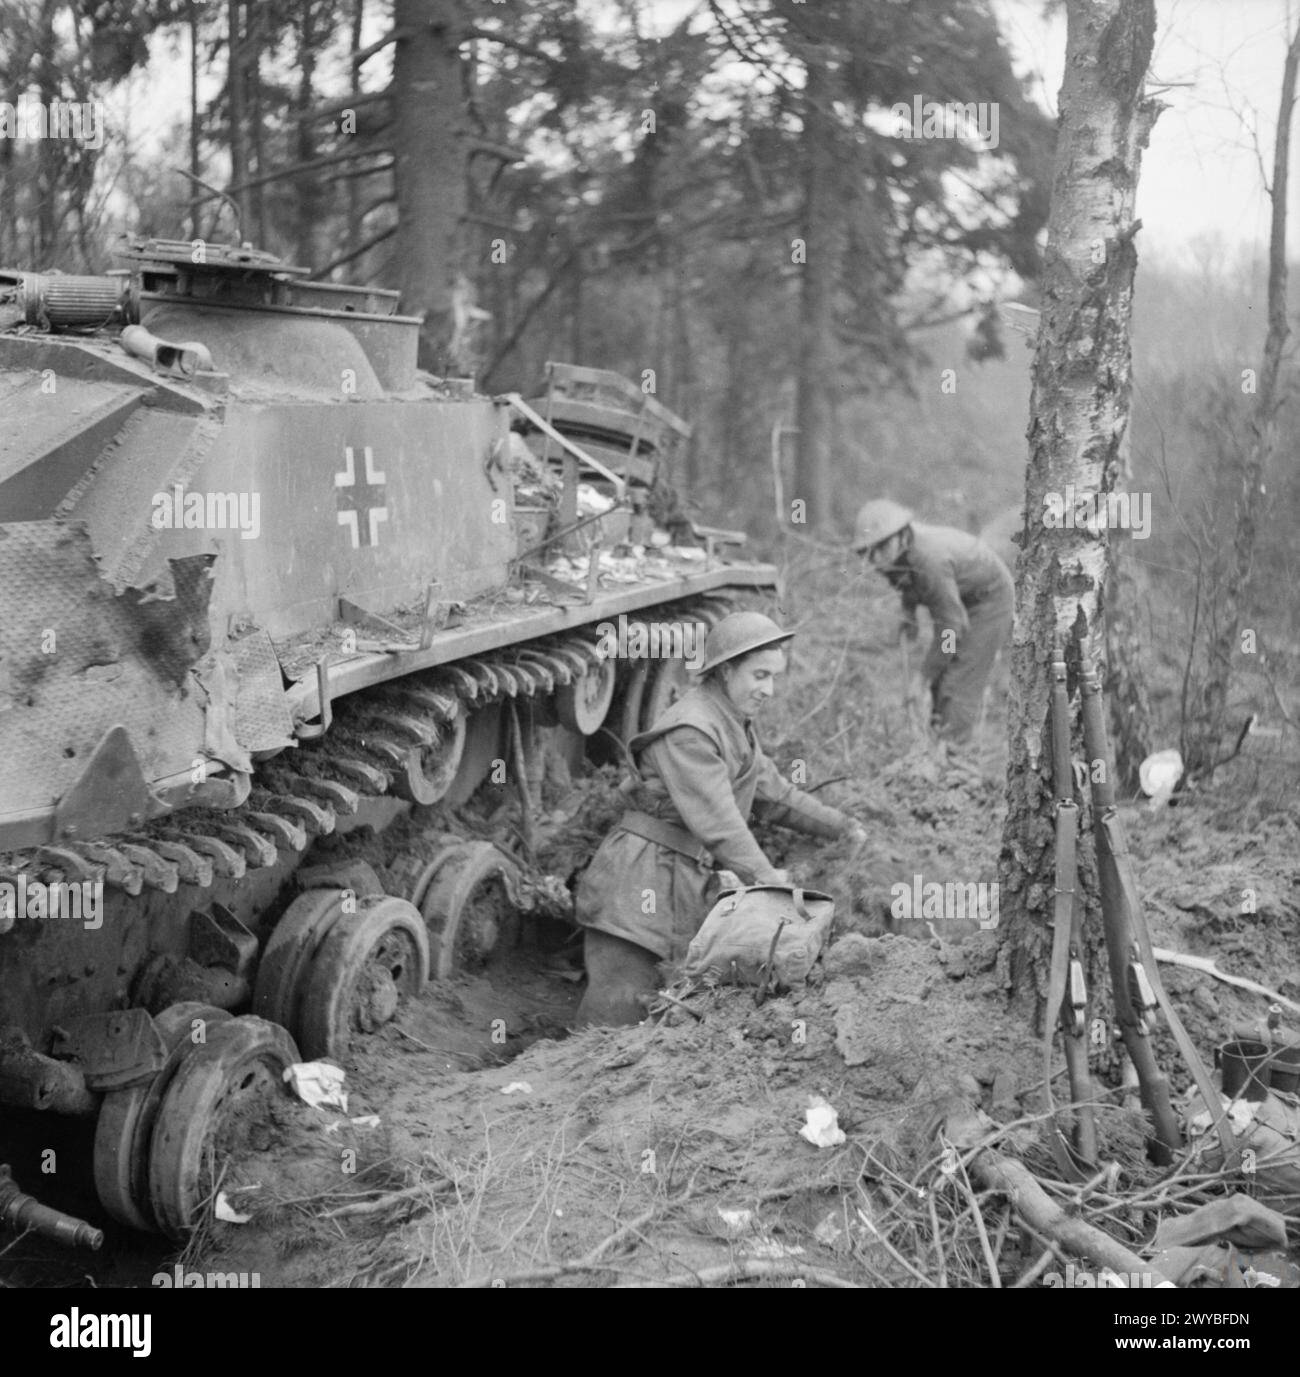 THE BRITISH ARMY IN NORTH-WEST EUROPE 1944-1945 - Men of the 4th Royal Welch Regiment construct a dug-out by the side of a knocked-out German StuG III assault gun near Weeze, 3 March 1945. , Stock Photo